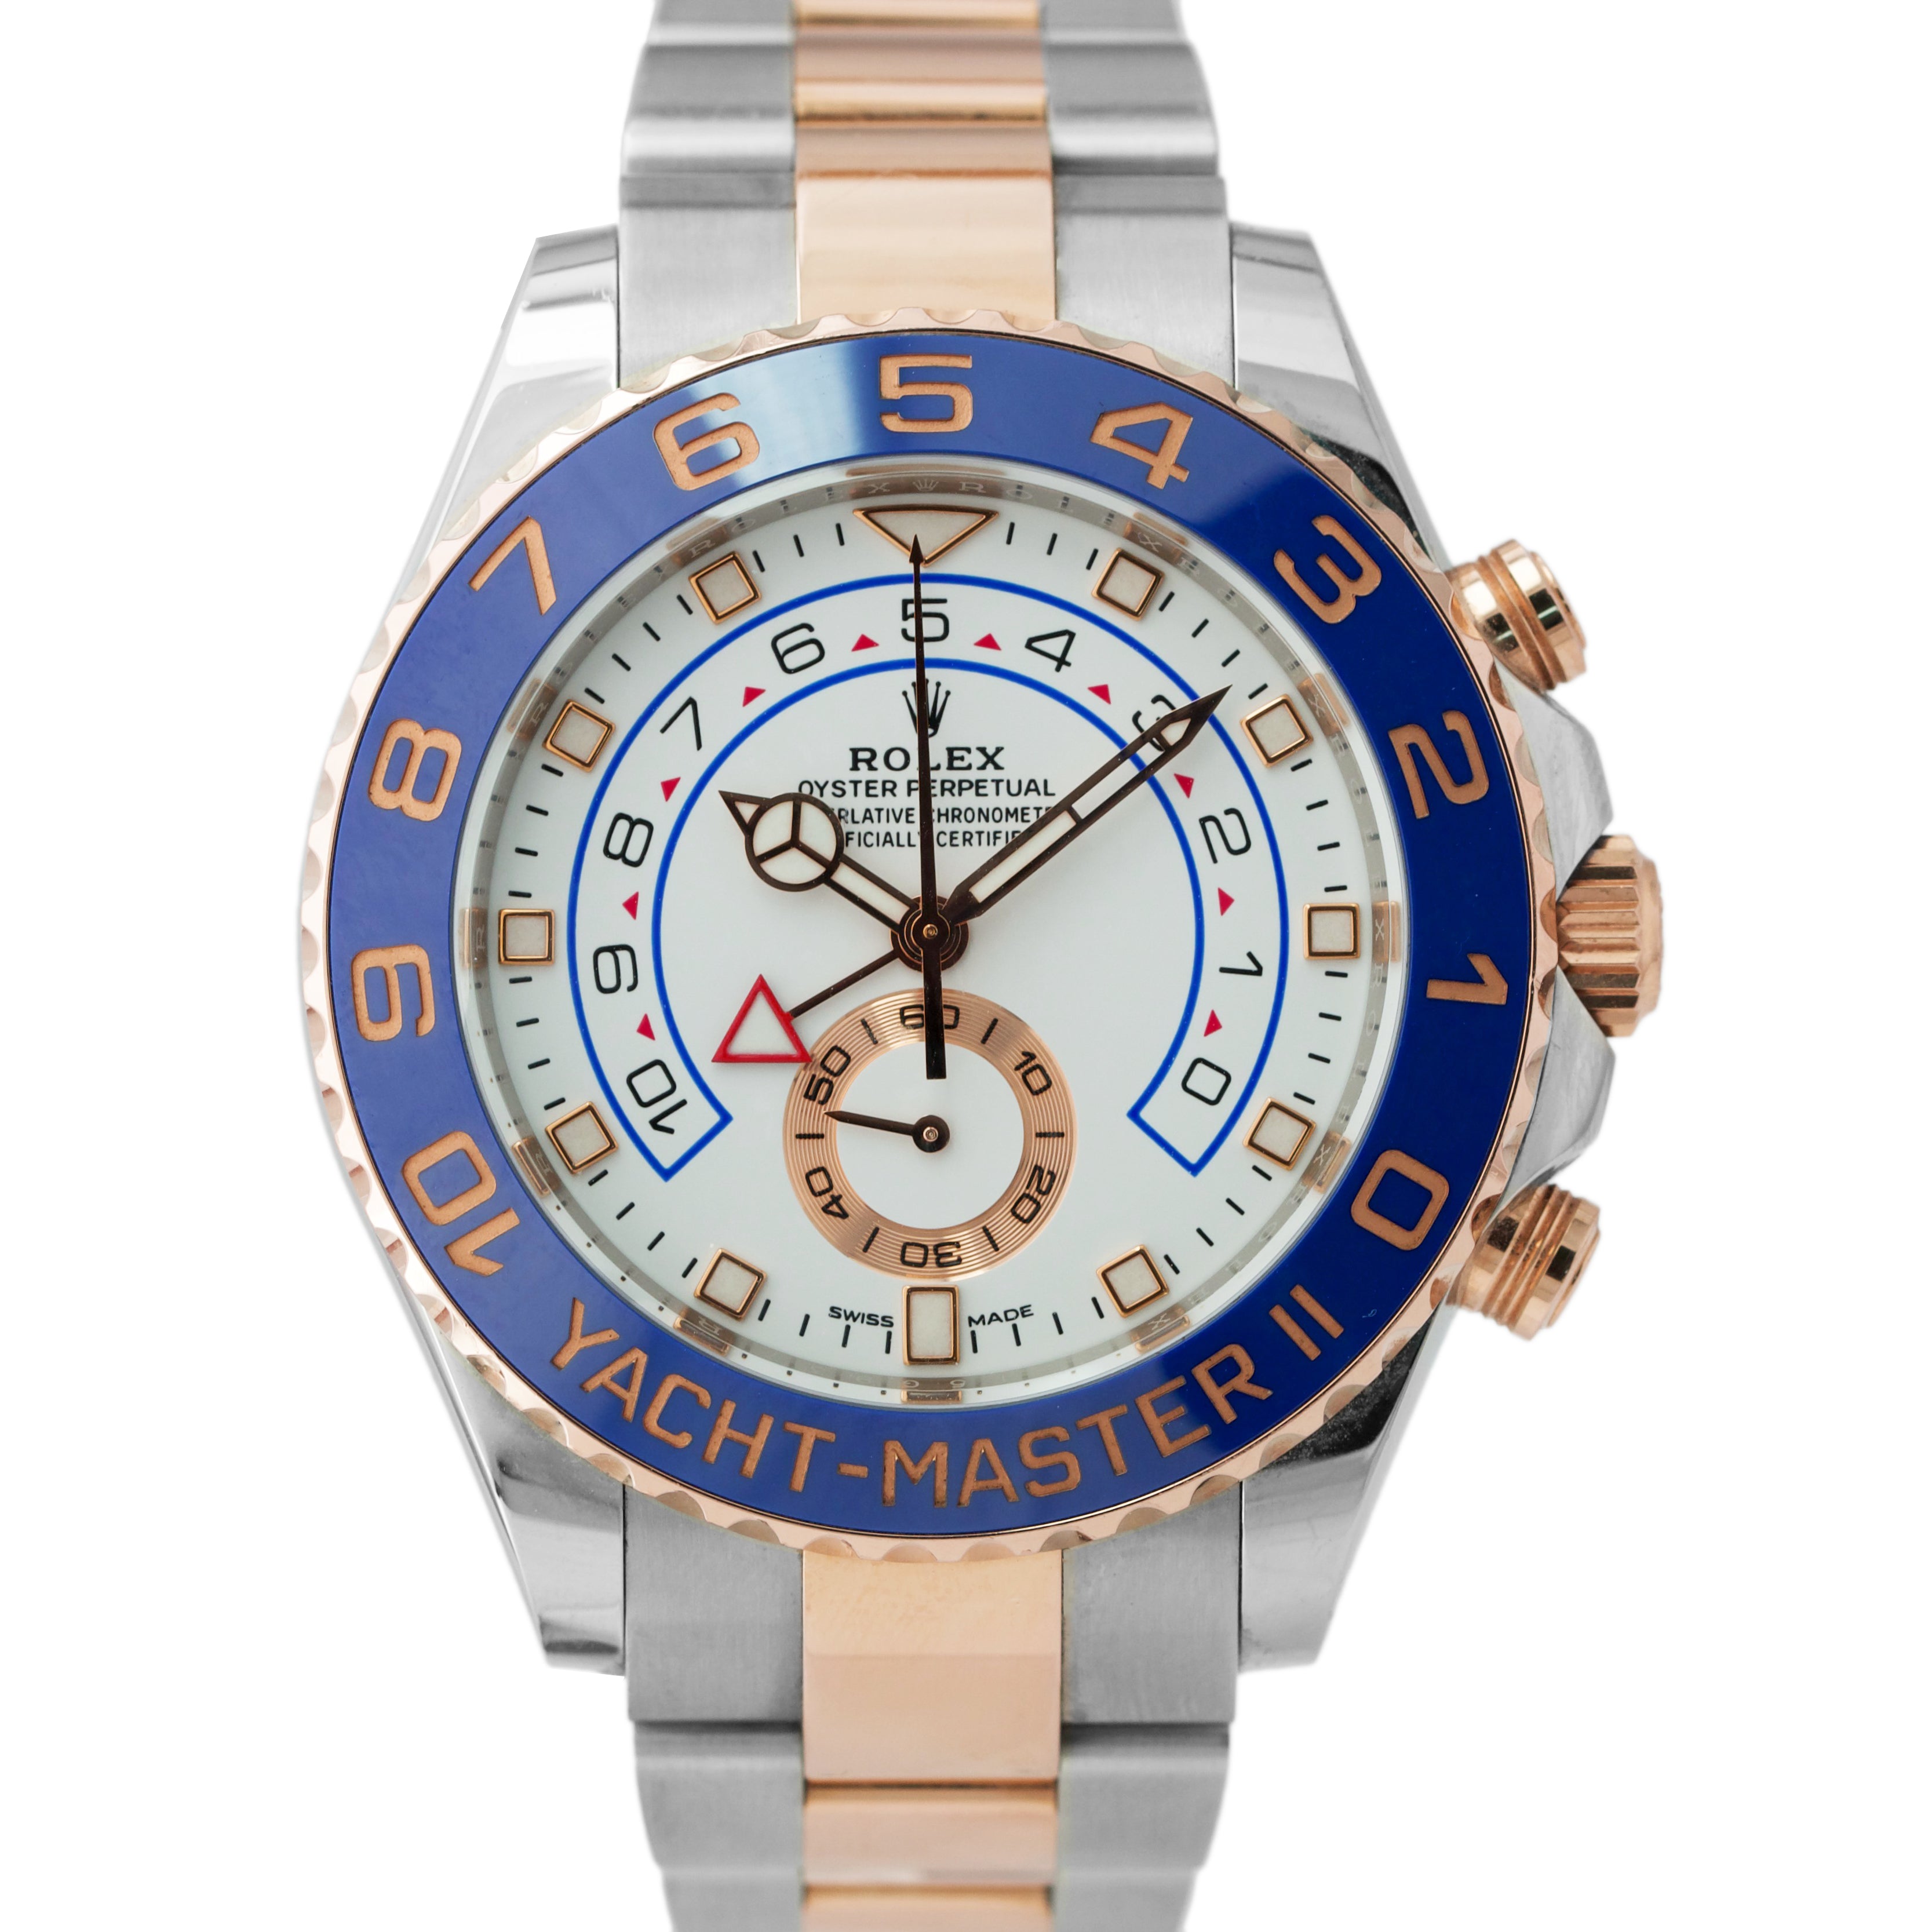 2018 Rolex Yacht-Master II MERCEDES HANDS 44mm Two-Tone Rose Watch 116681 B+P